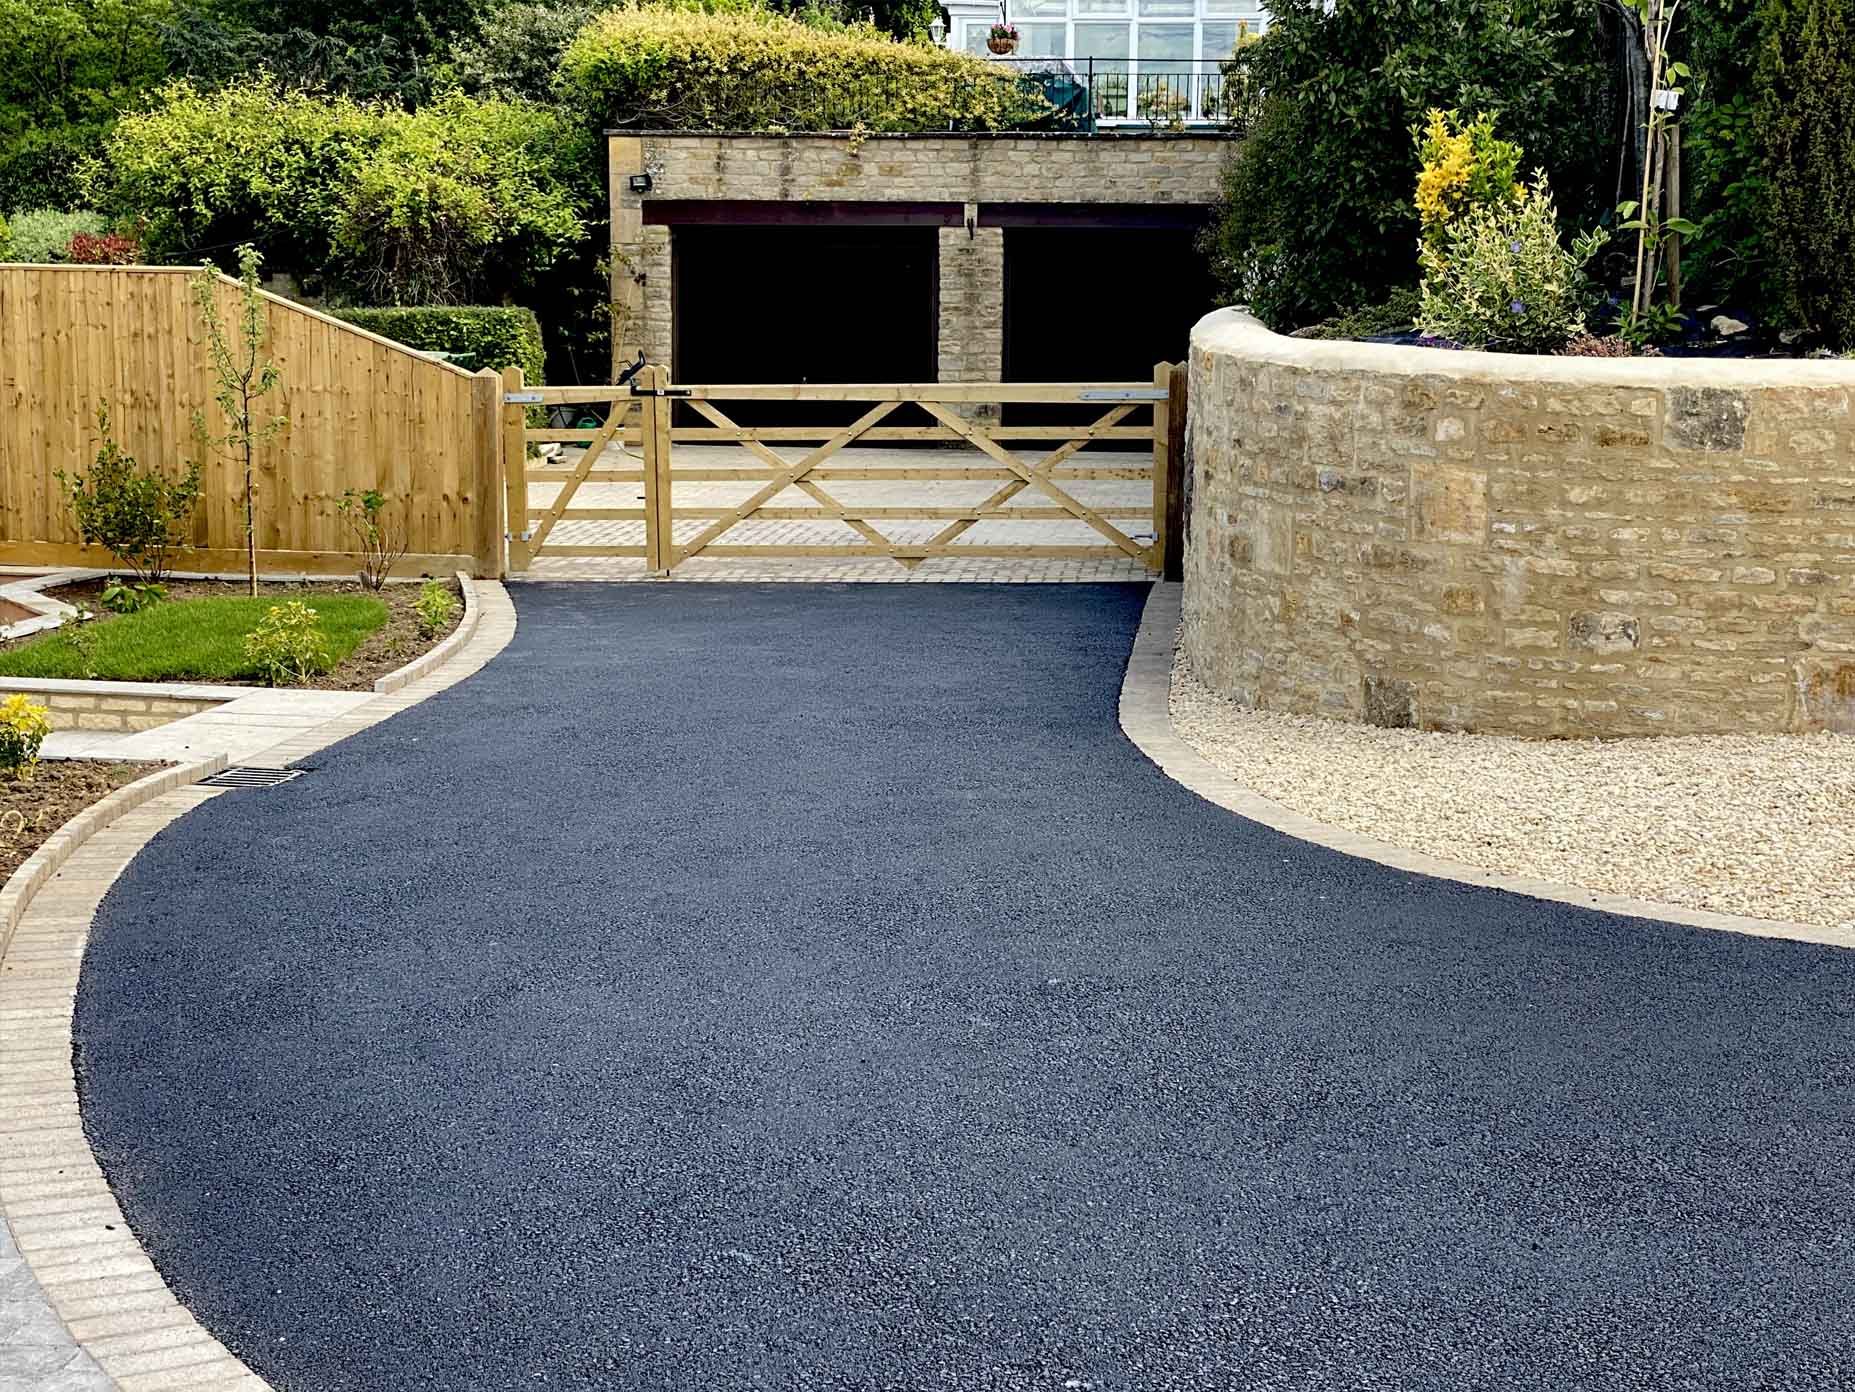 Tarmac driveway leading to a house gate, showcasing the smooth and durable surface of our tarmac driveways